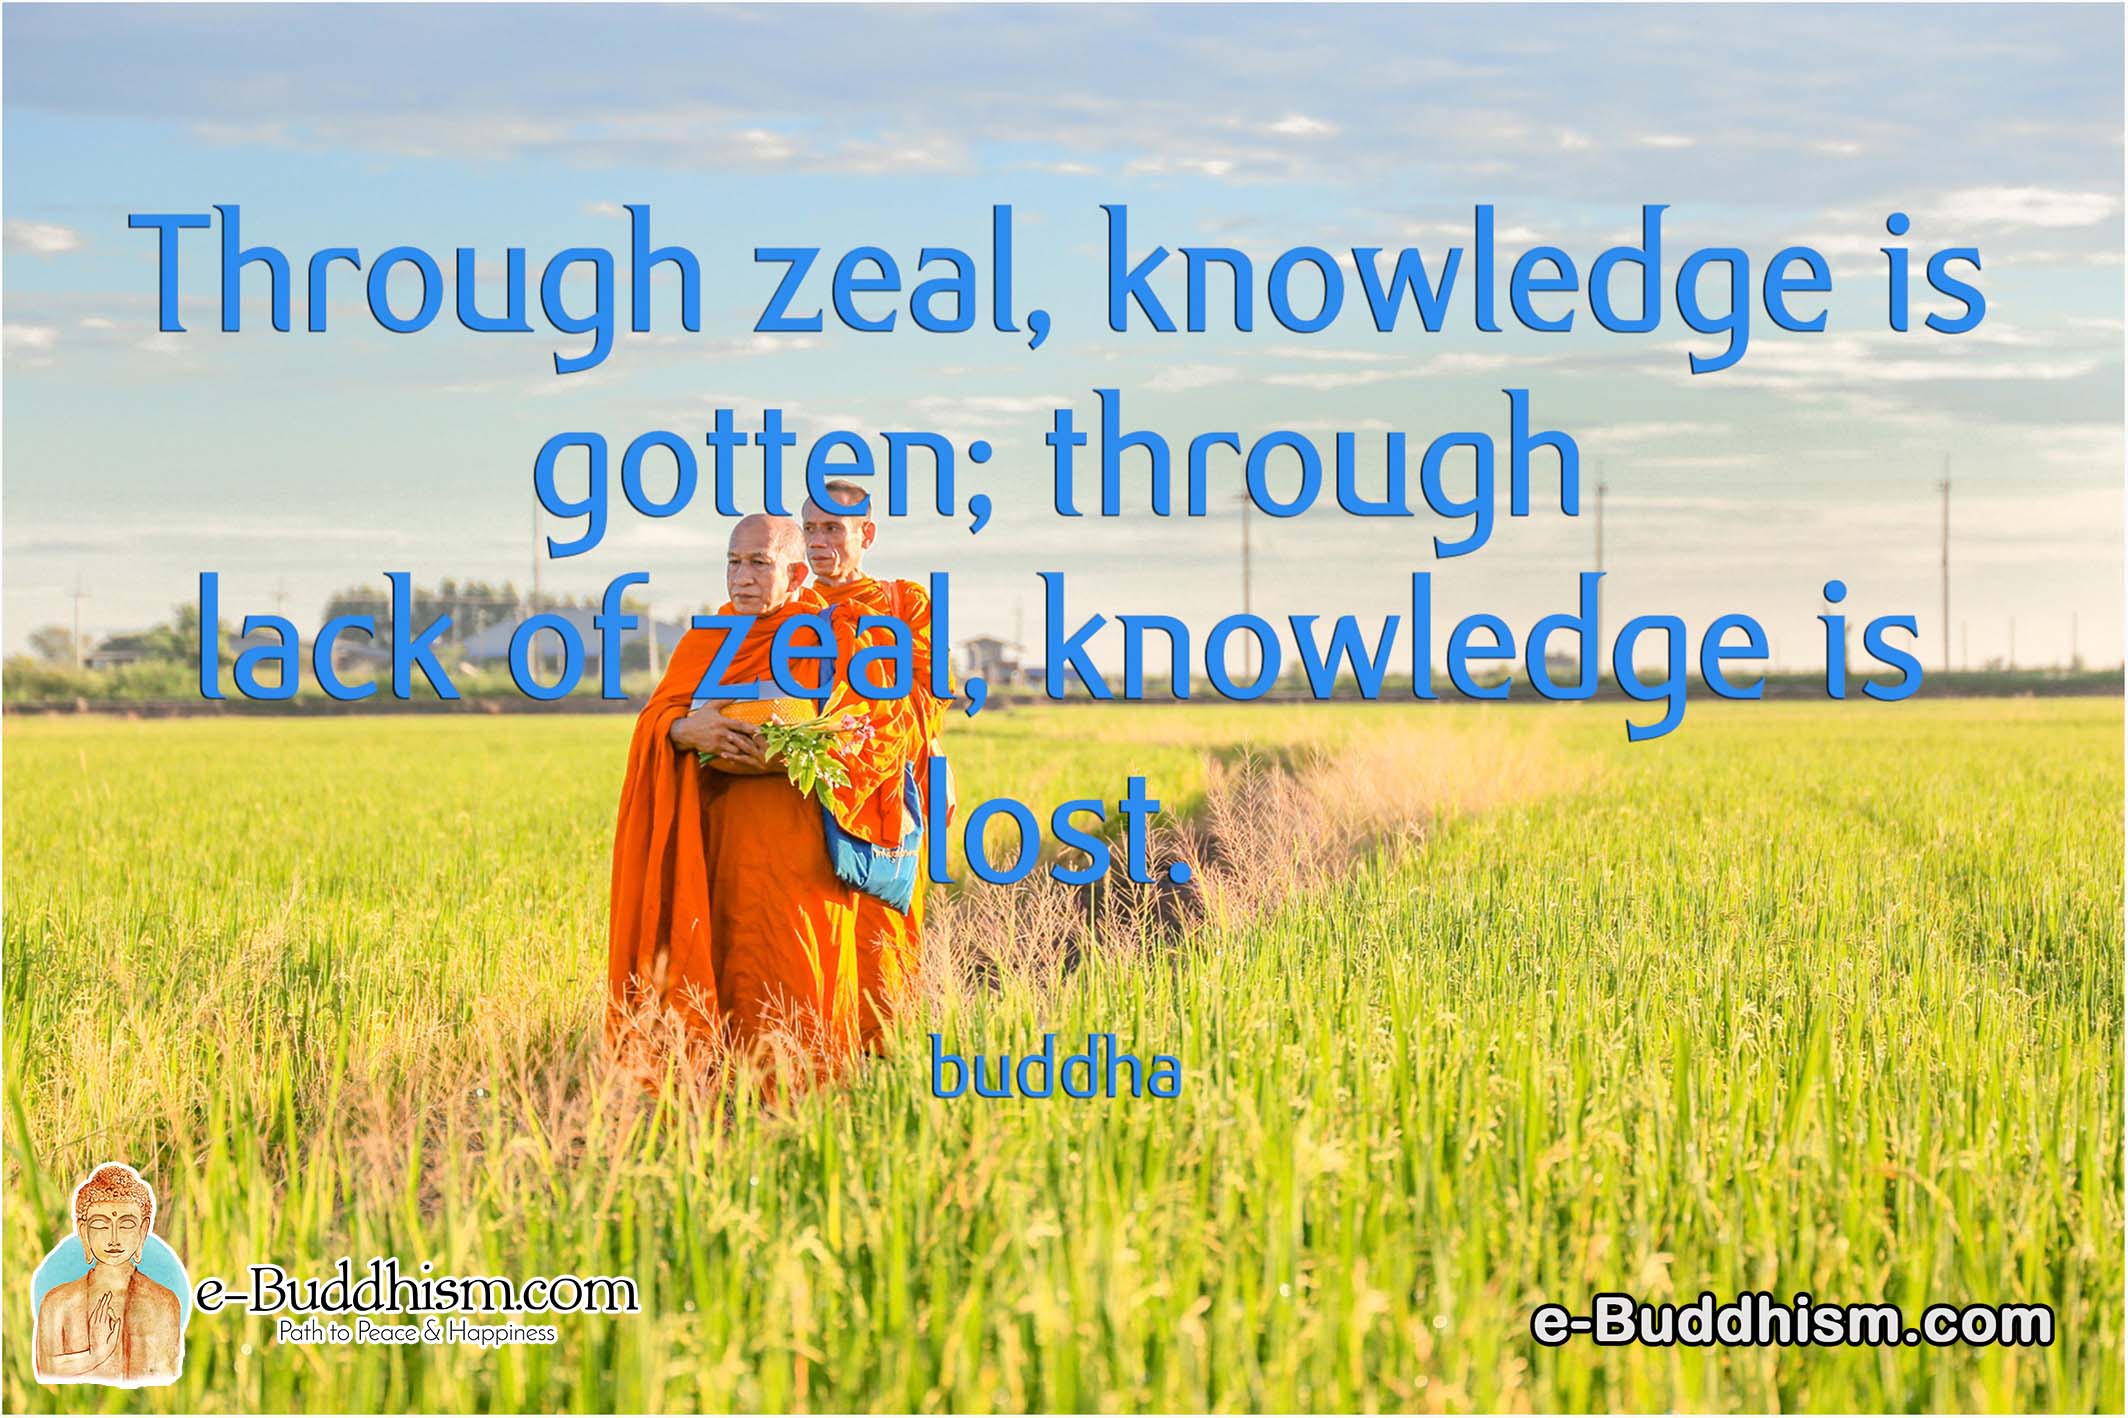 Through zeal, knowledge is gotten; through lack of zeal, knowledge is lost. -Buddha